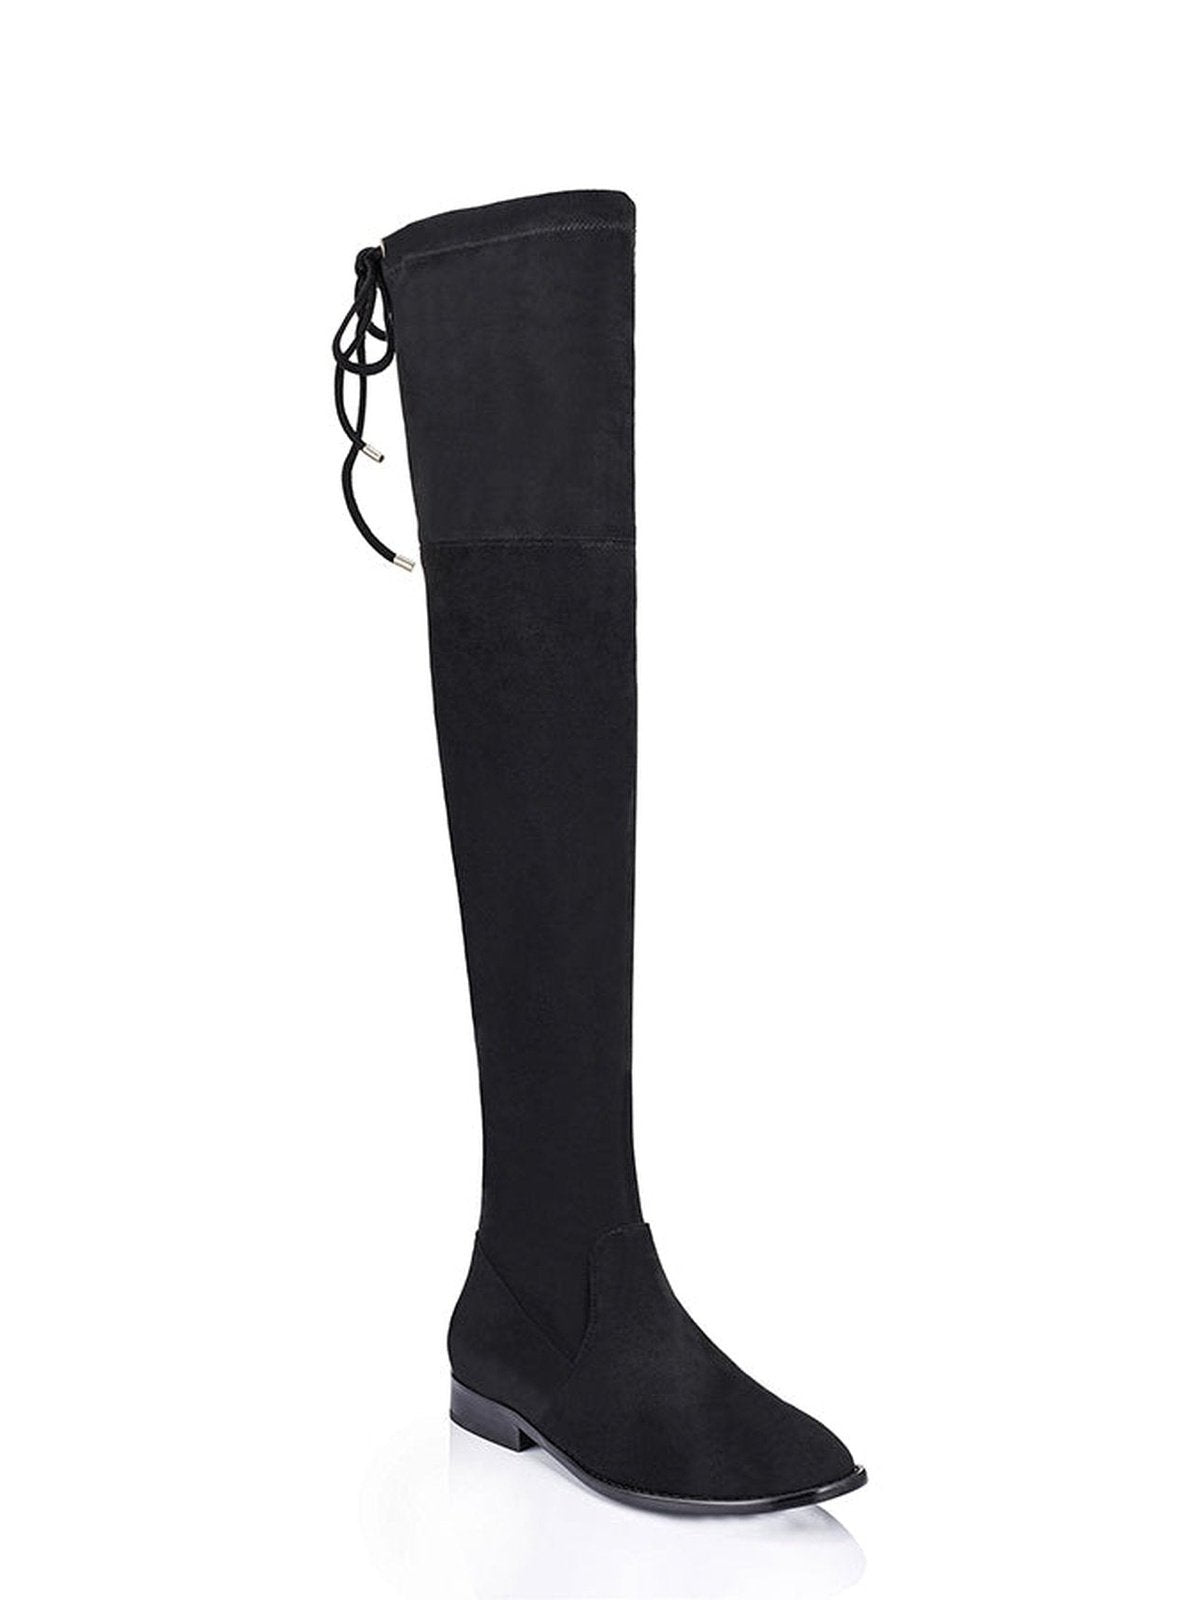 Quest Knee High Boots - Black Microsuede